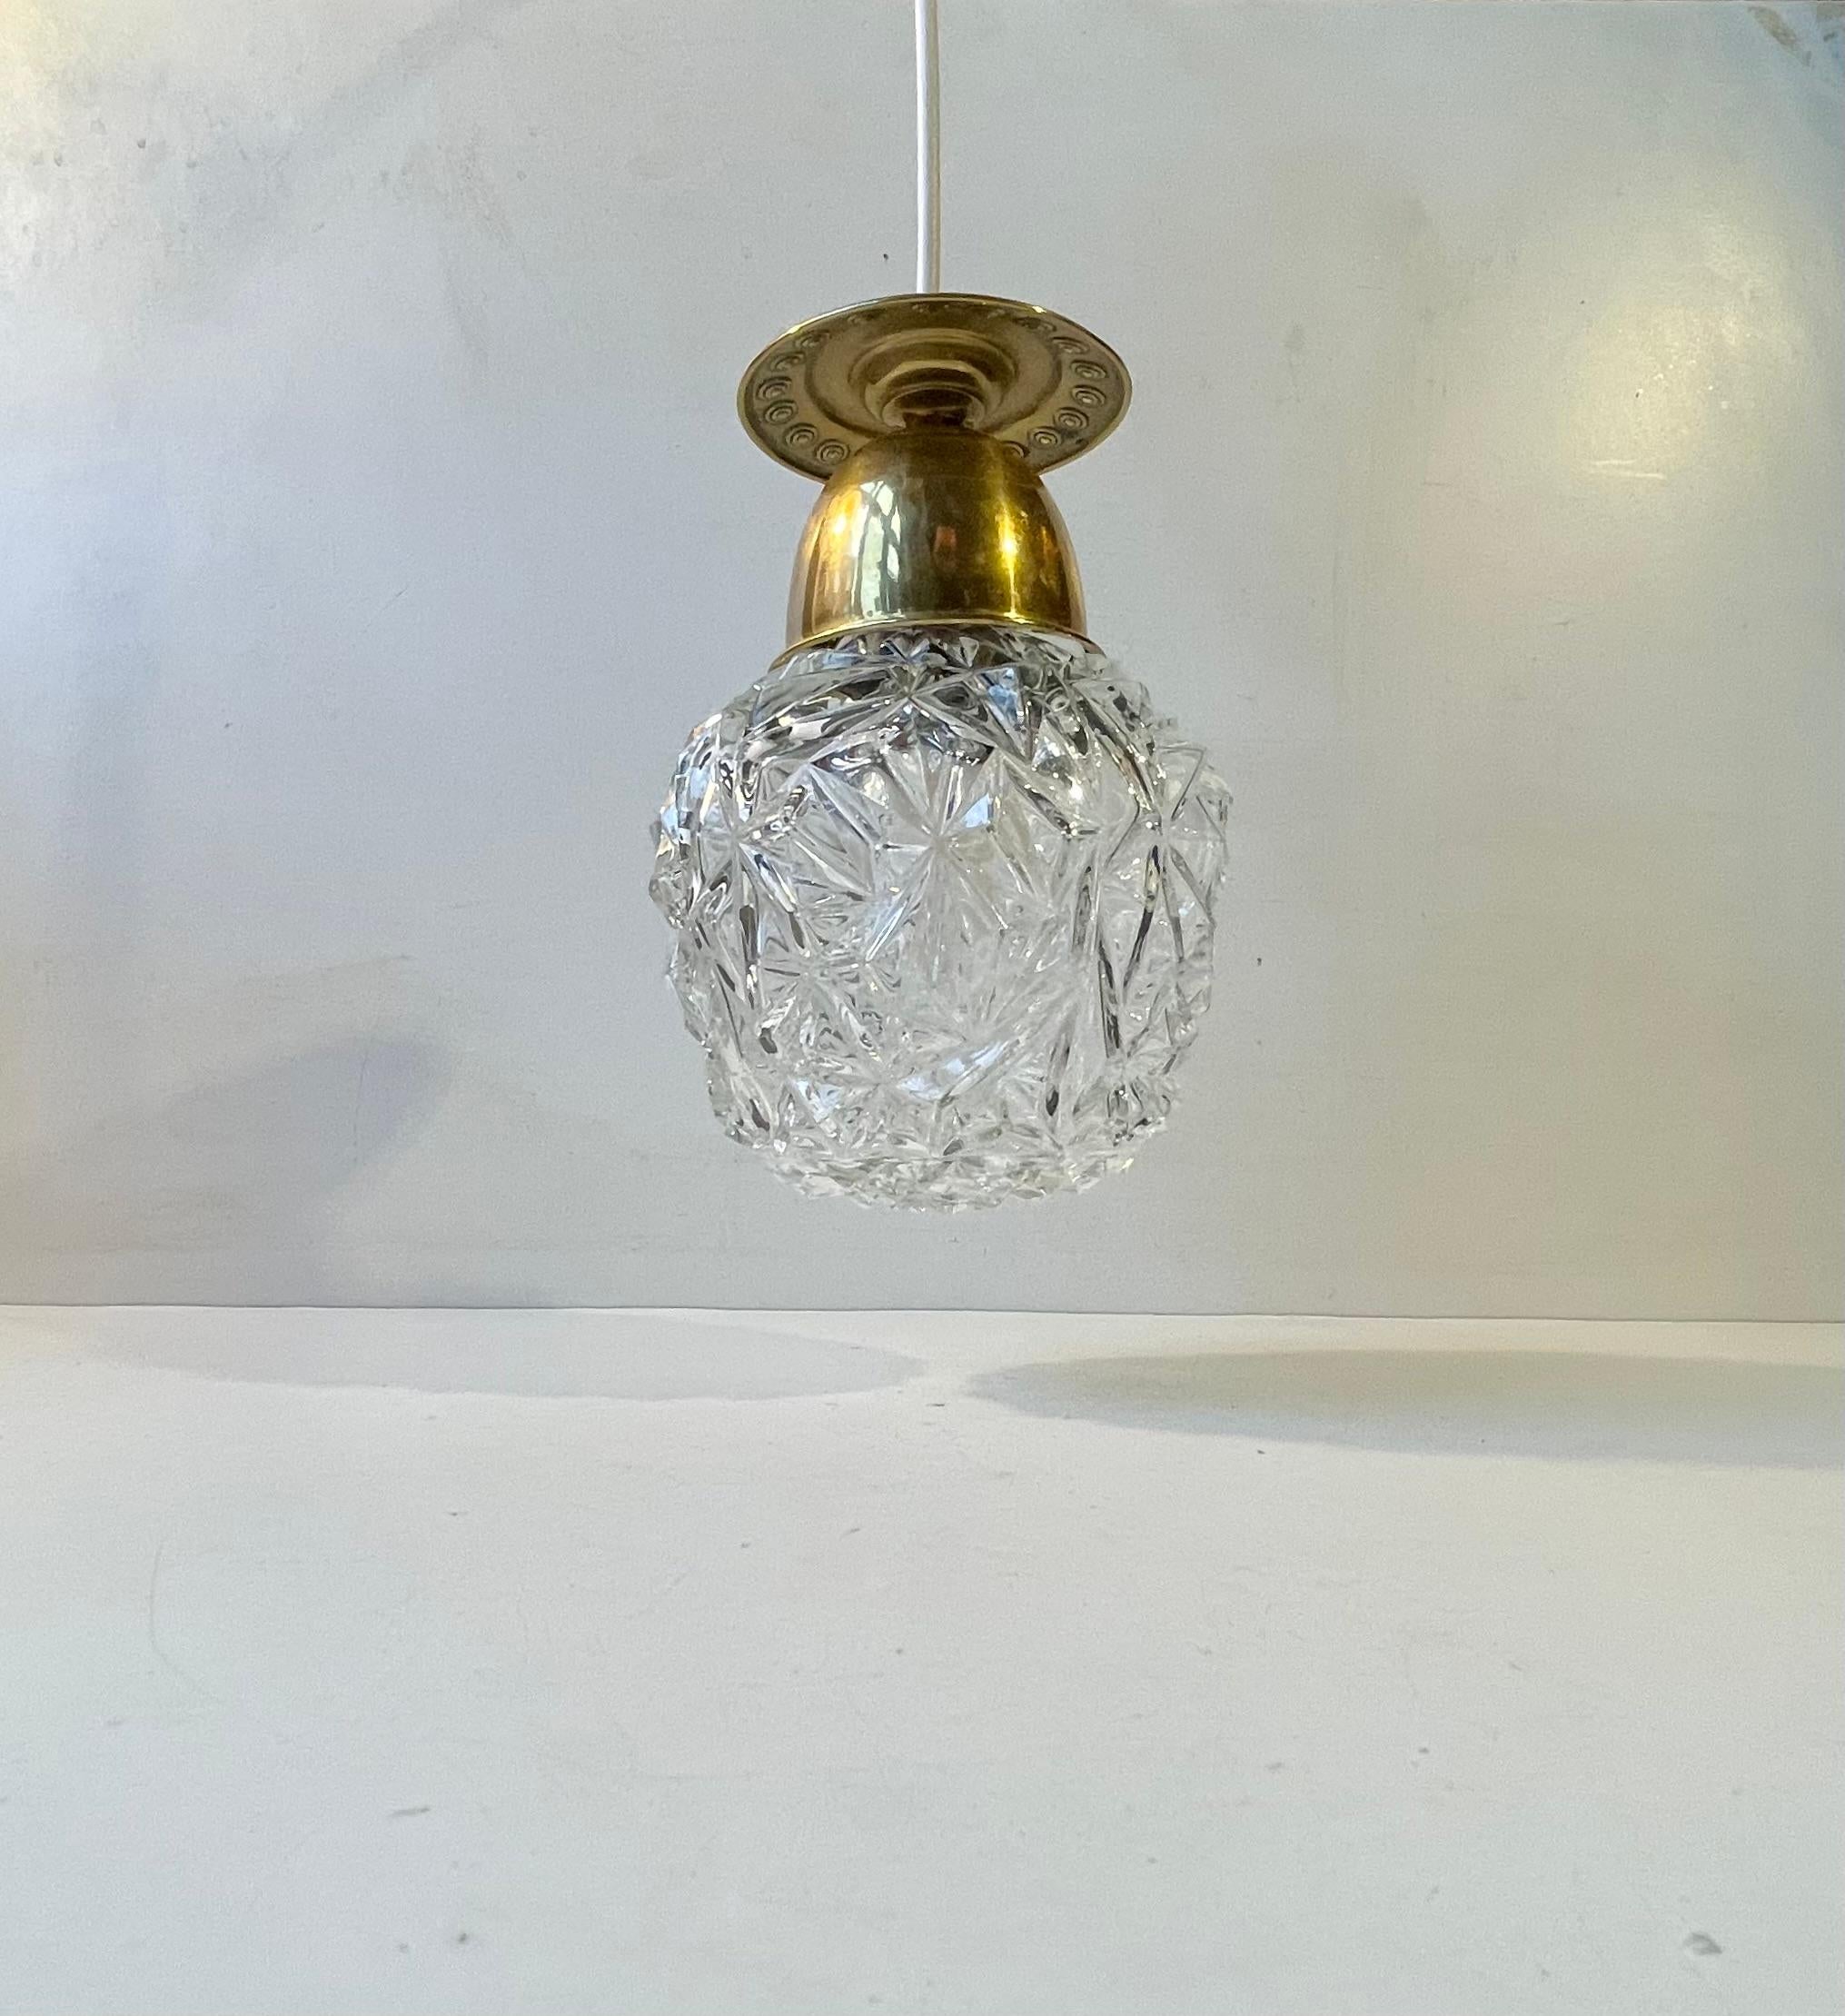 Small stylish hanging light featuring an ornamented brass top and a pressed glass shade. It was manufactured in Italy during the 1960s. Measurements: H: 21 cm, Diameter: 13 cm. Working and tested vintage order. Comes installed with 3 meters new